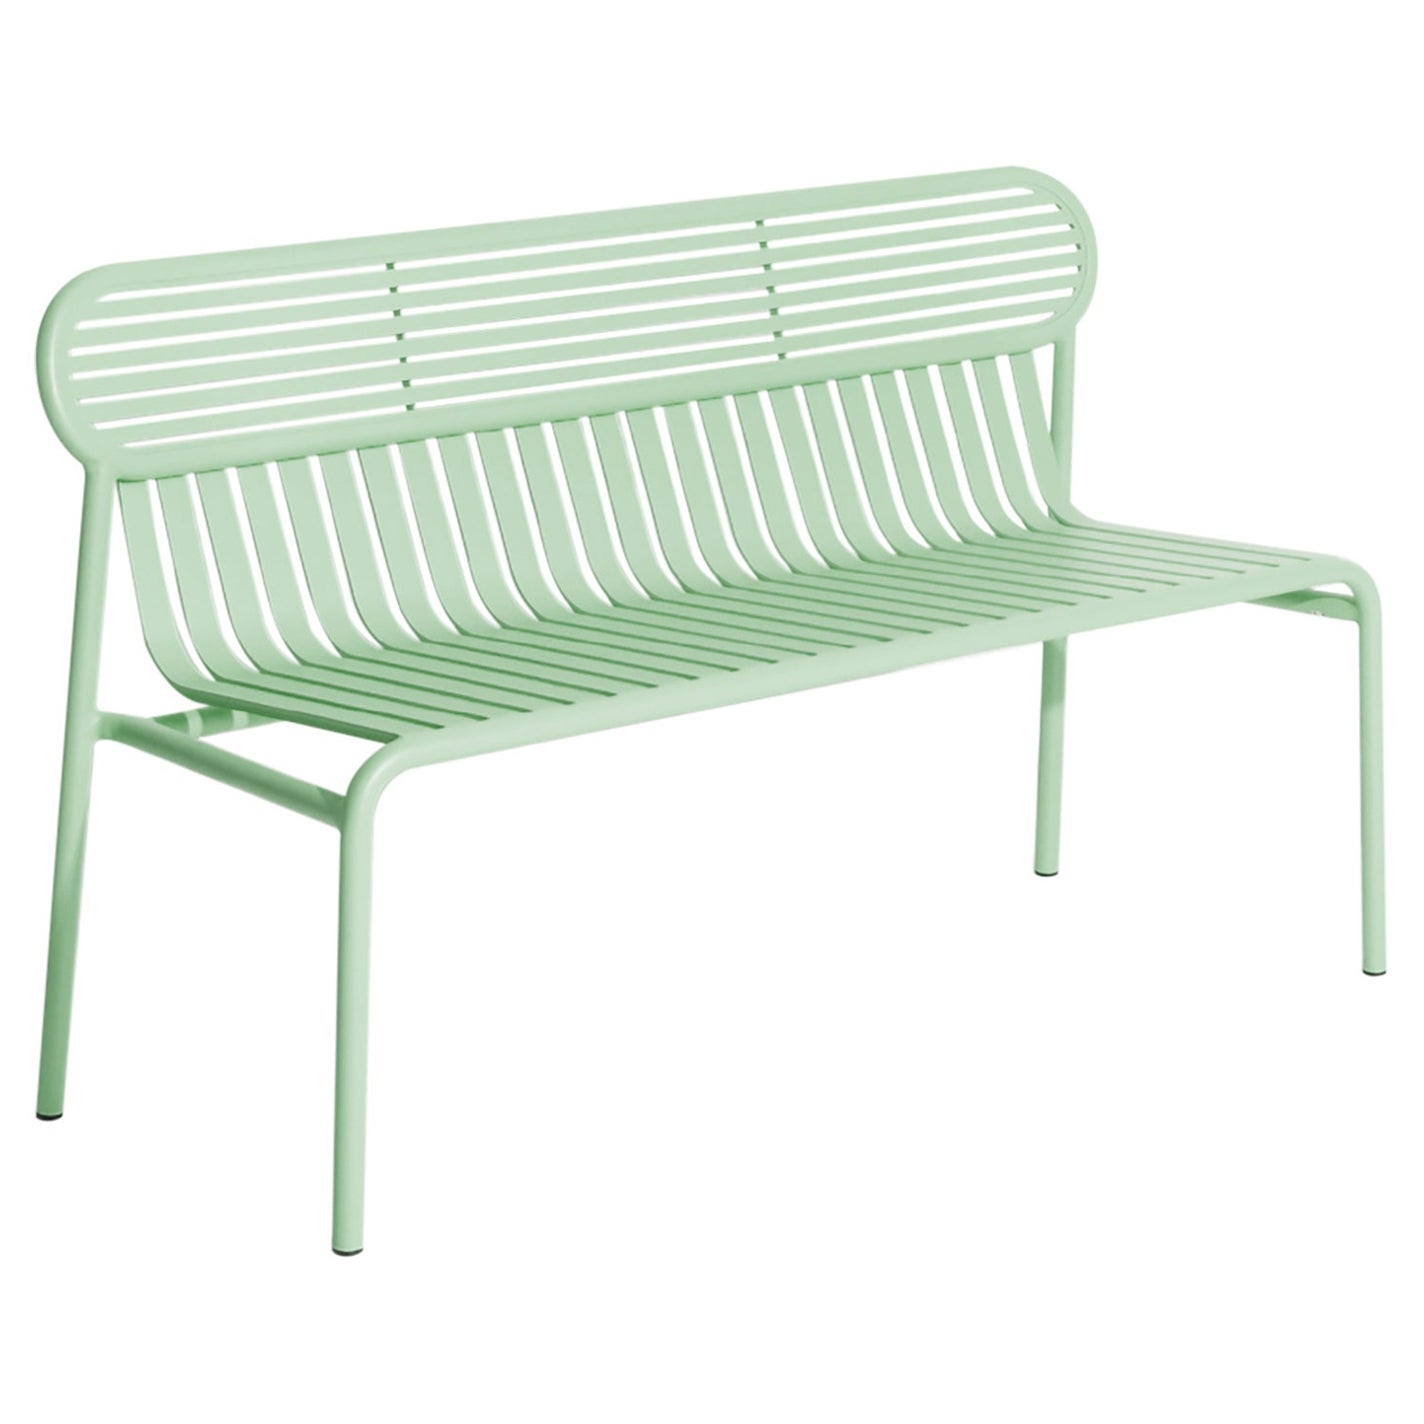 Petite Friture Week-End Bench in Pastel Green Aluminium by Studio BrichetZiegler For Sale